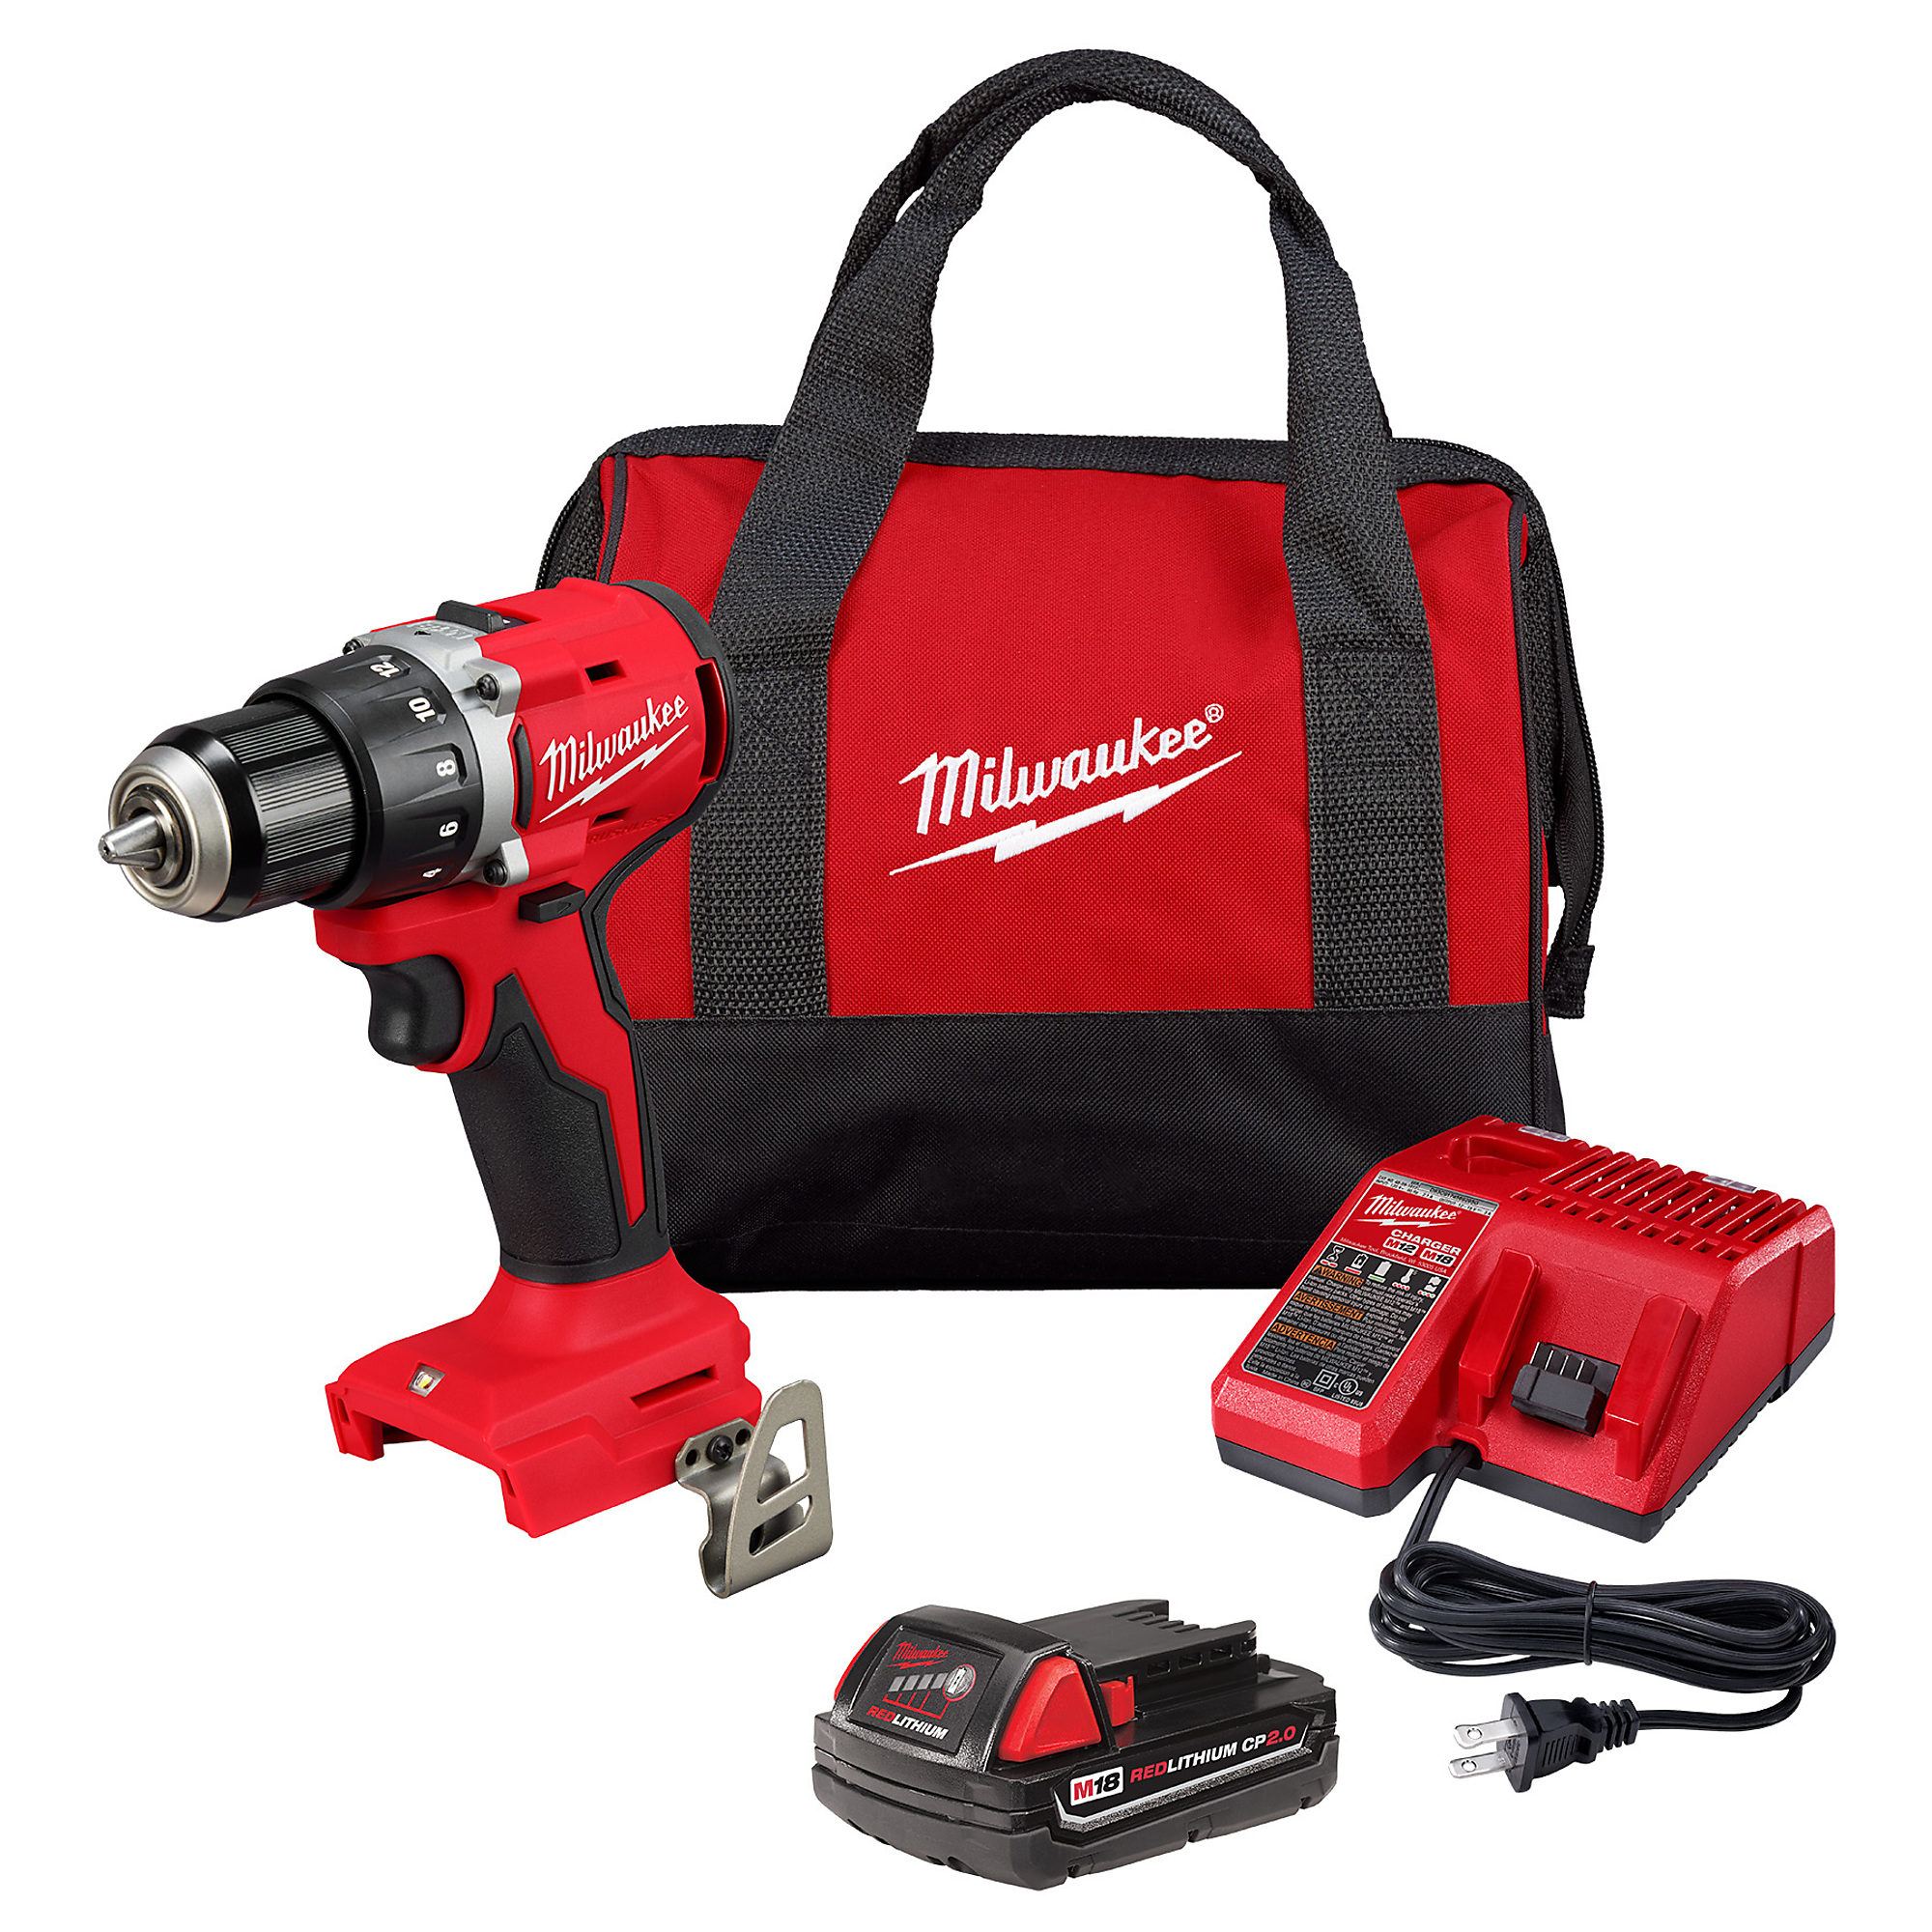 M18 Compact Brushless 1/2Inch Drill/Driver Kit, Chuck Size 1/2 in, Max. Torque 550 ft./lbs., Max. Speed 1700 rpm, Model - Milwaukee 3601-21P